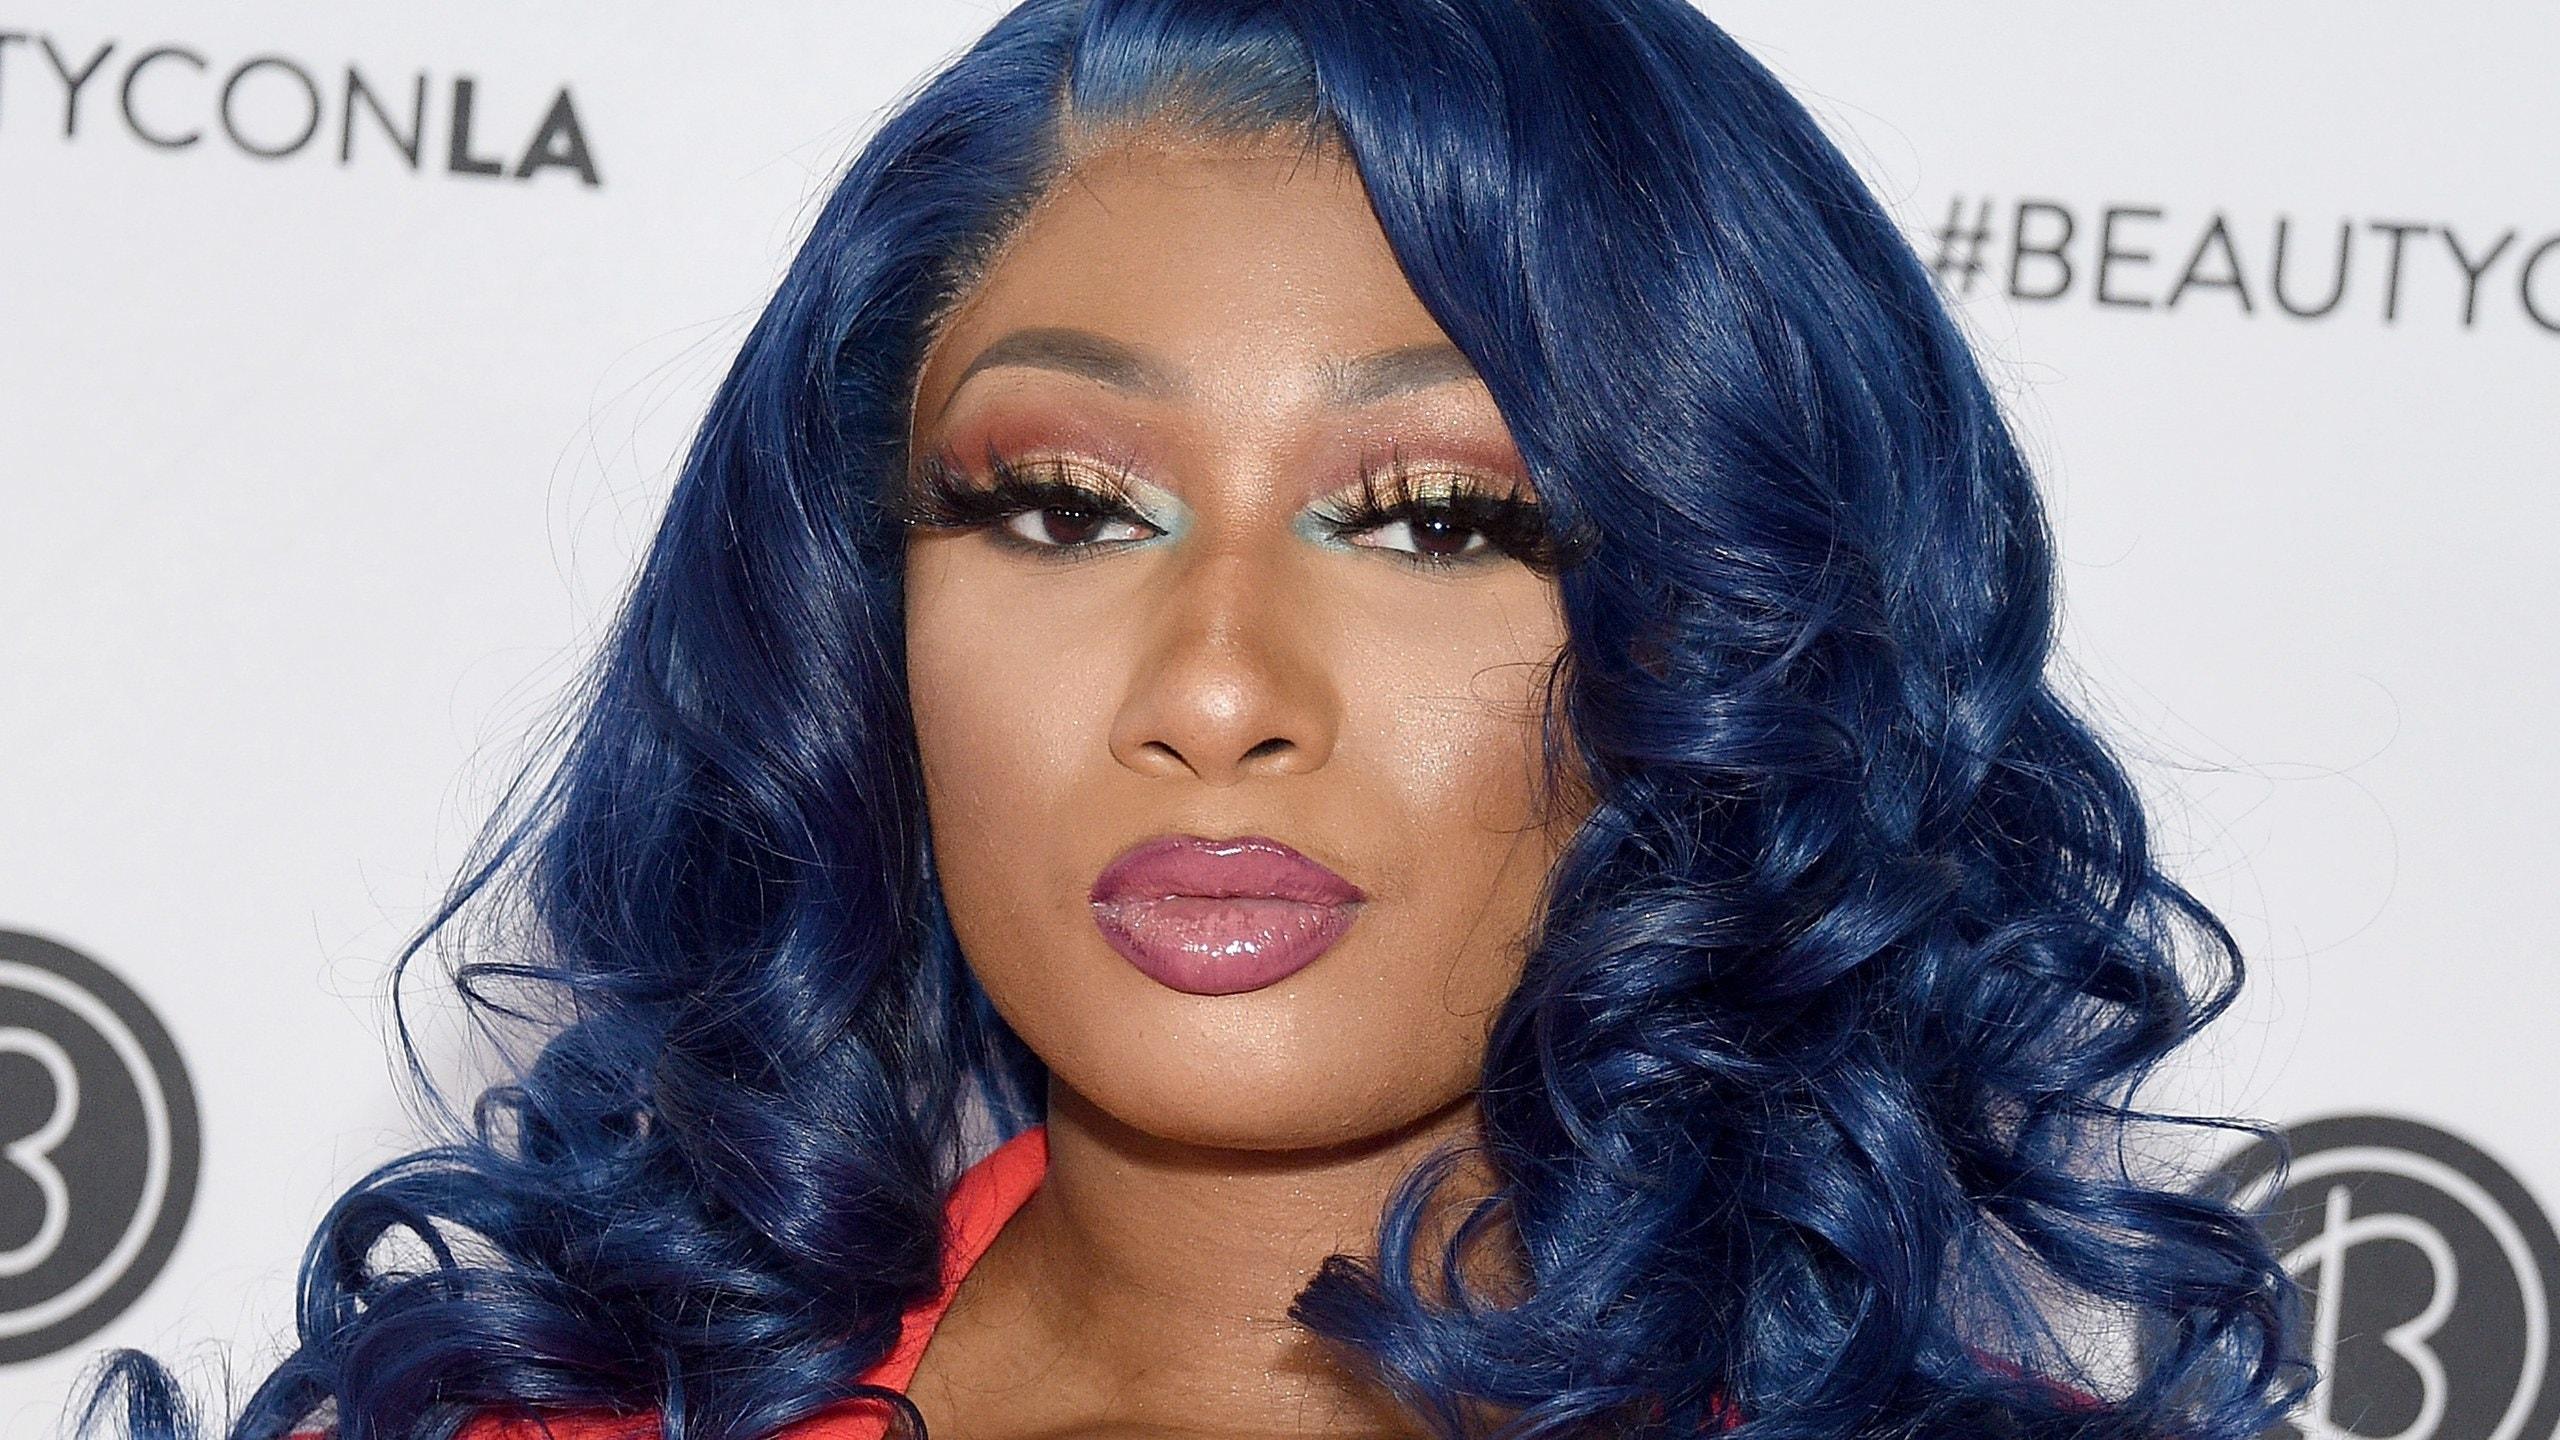 Megan Thee Stallion Shows Her Natural Curls on Instagram